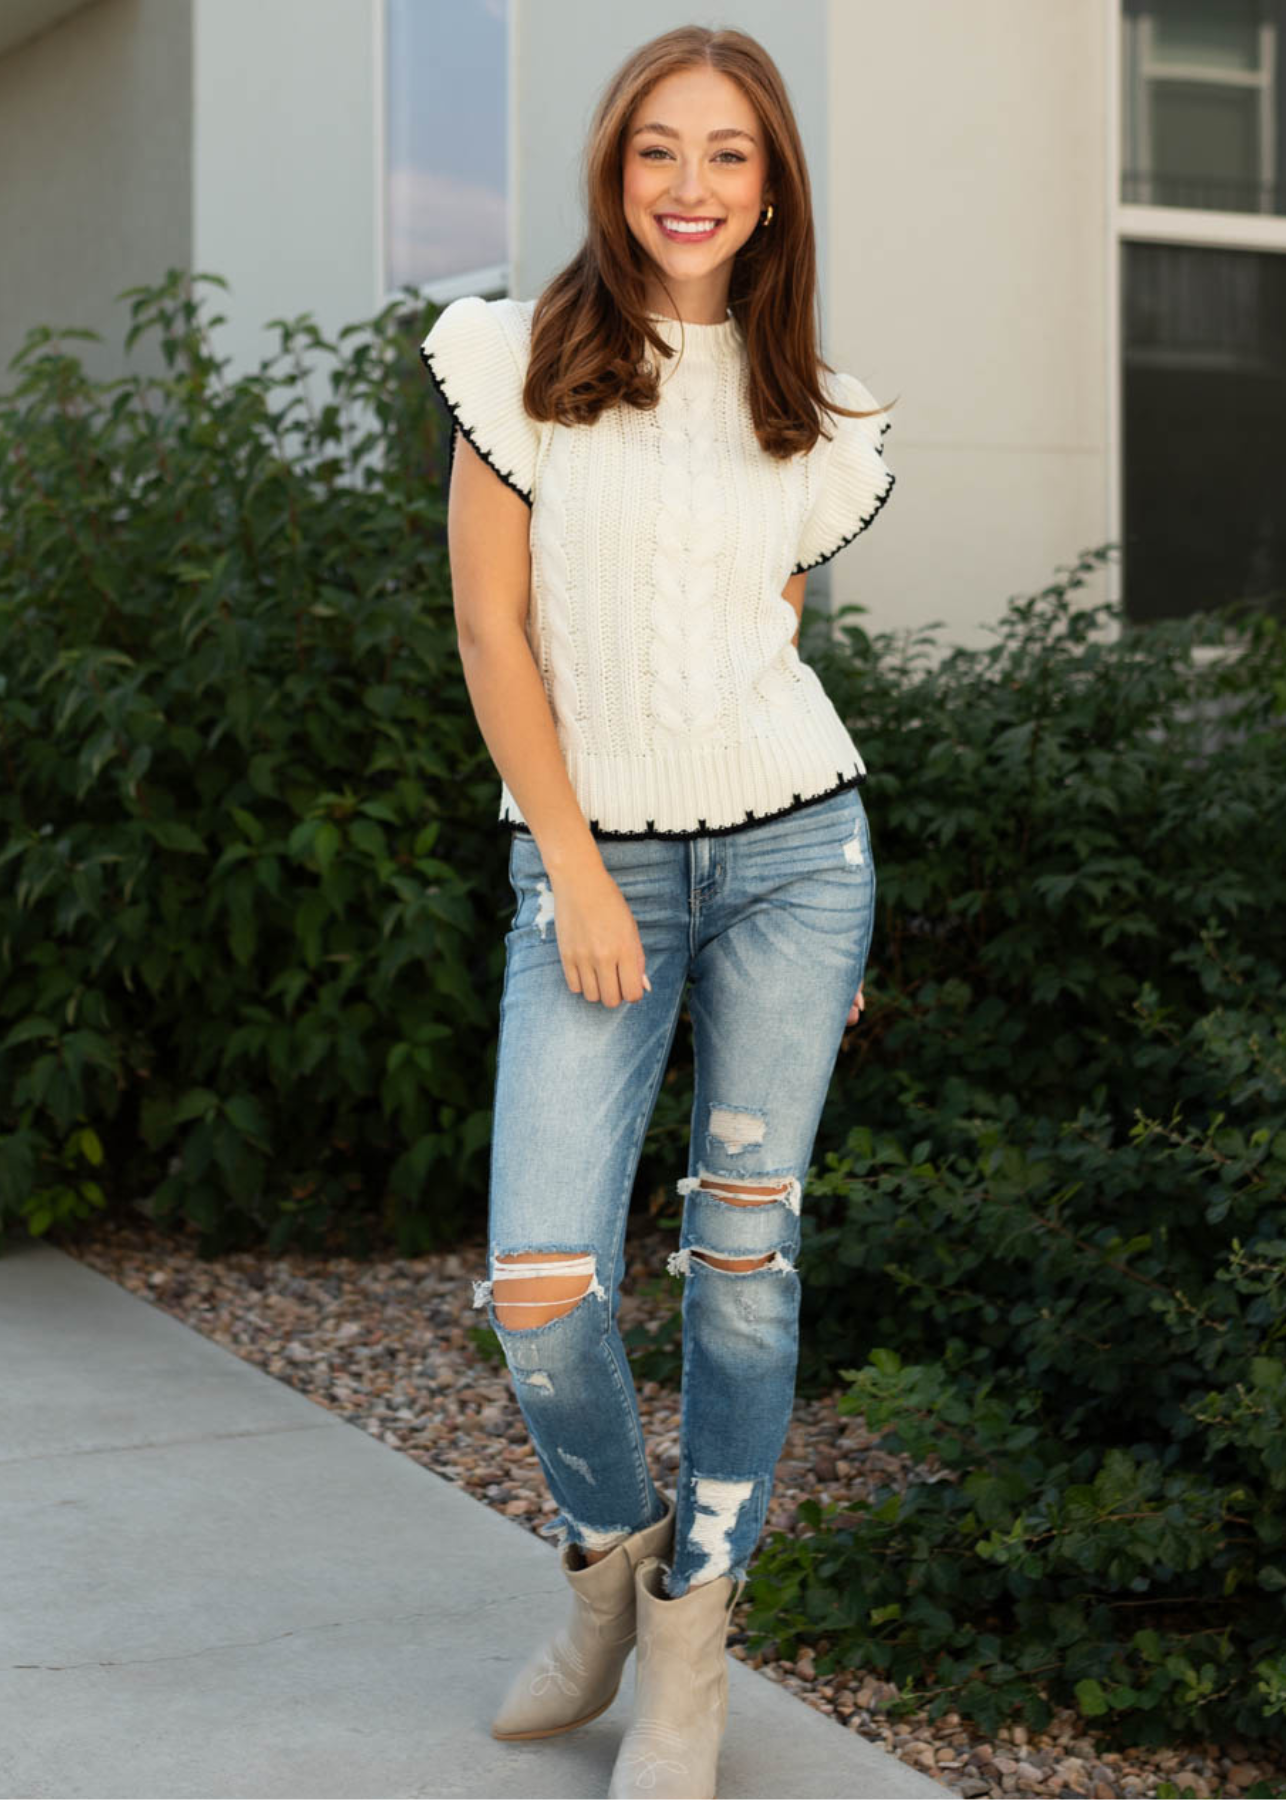 Short sleeve ivory knit top sweater